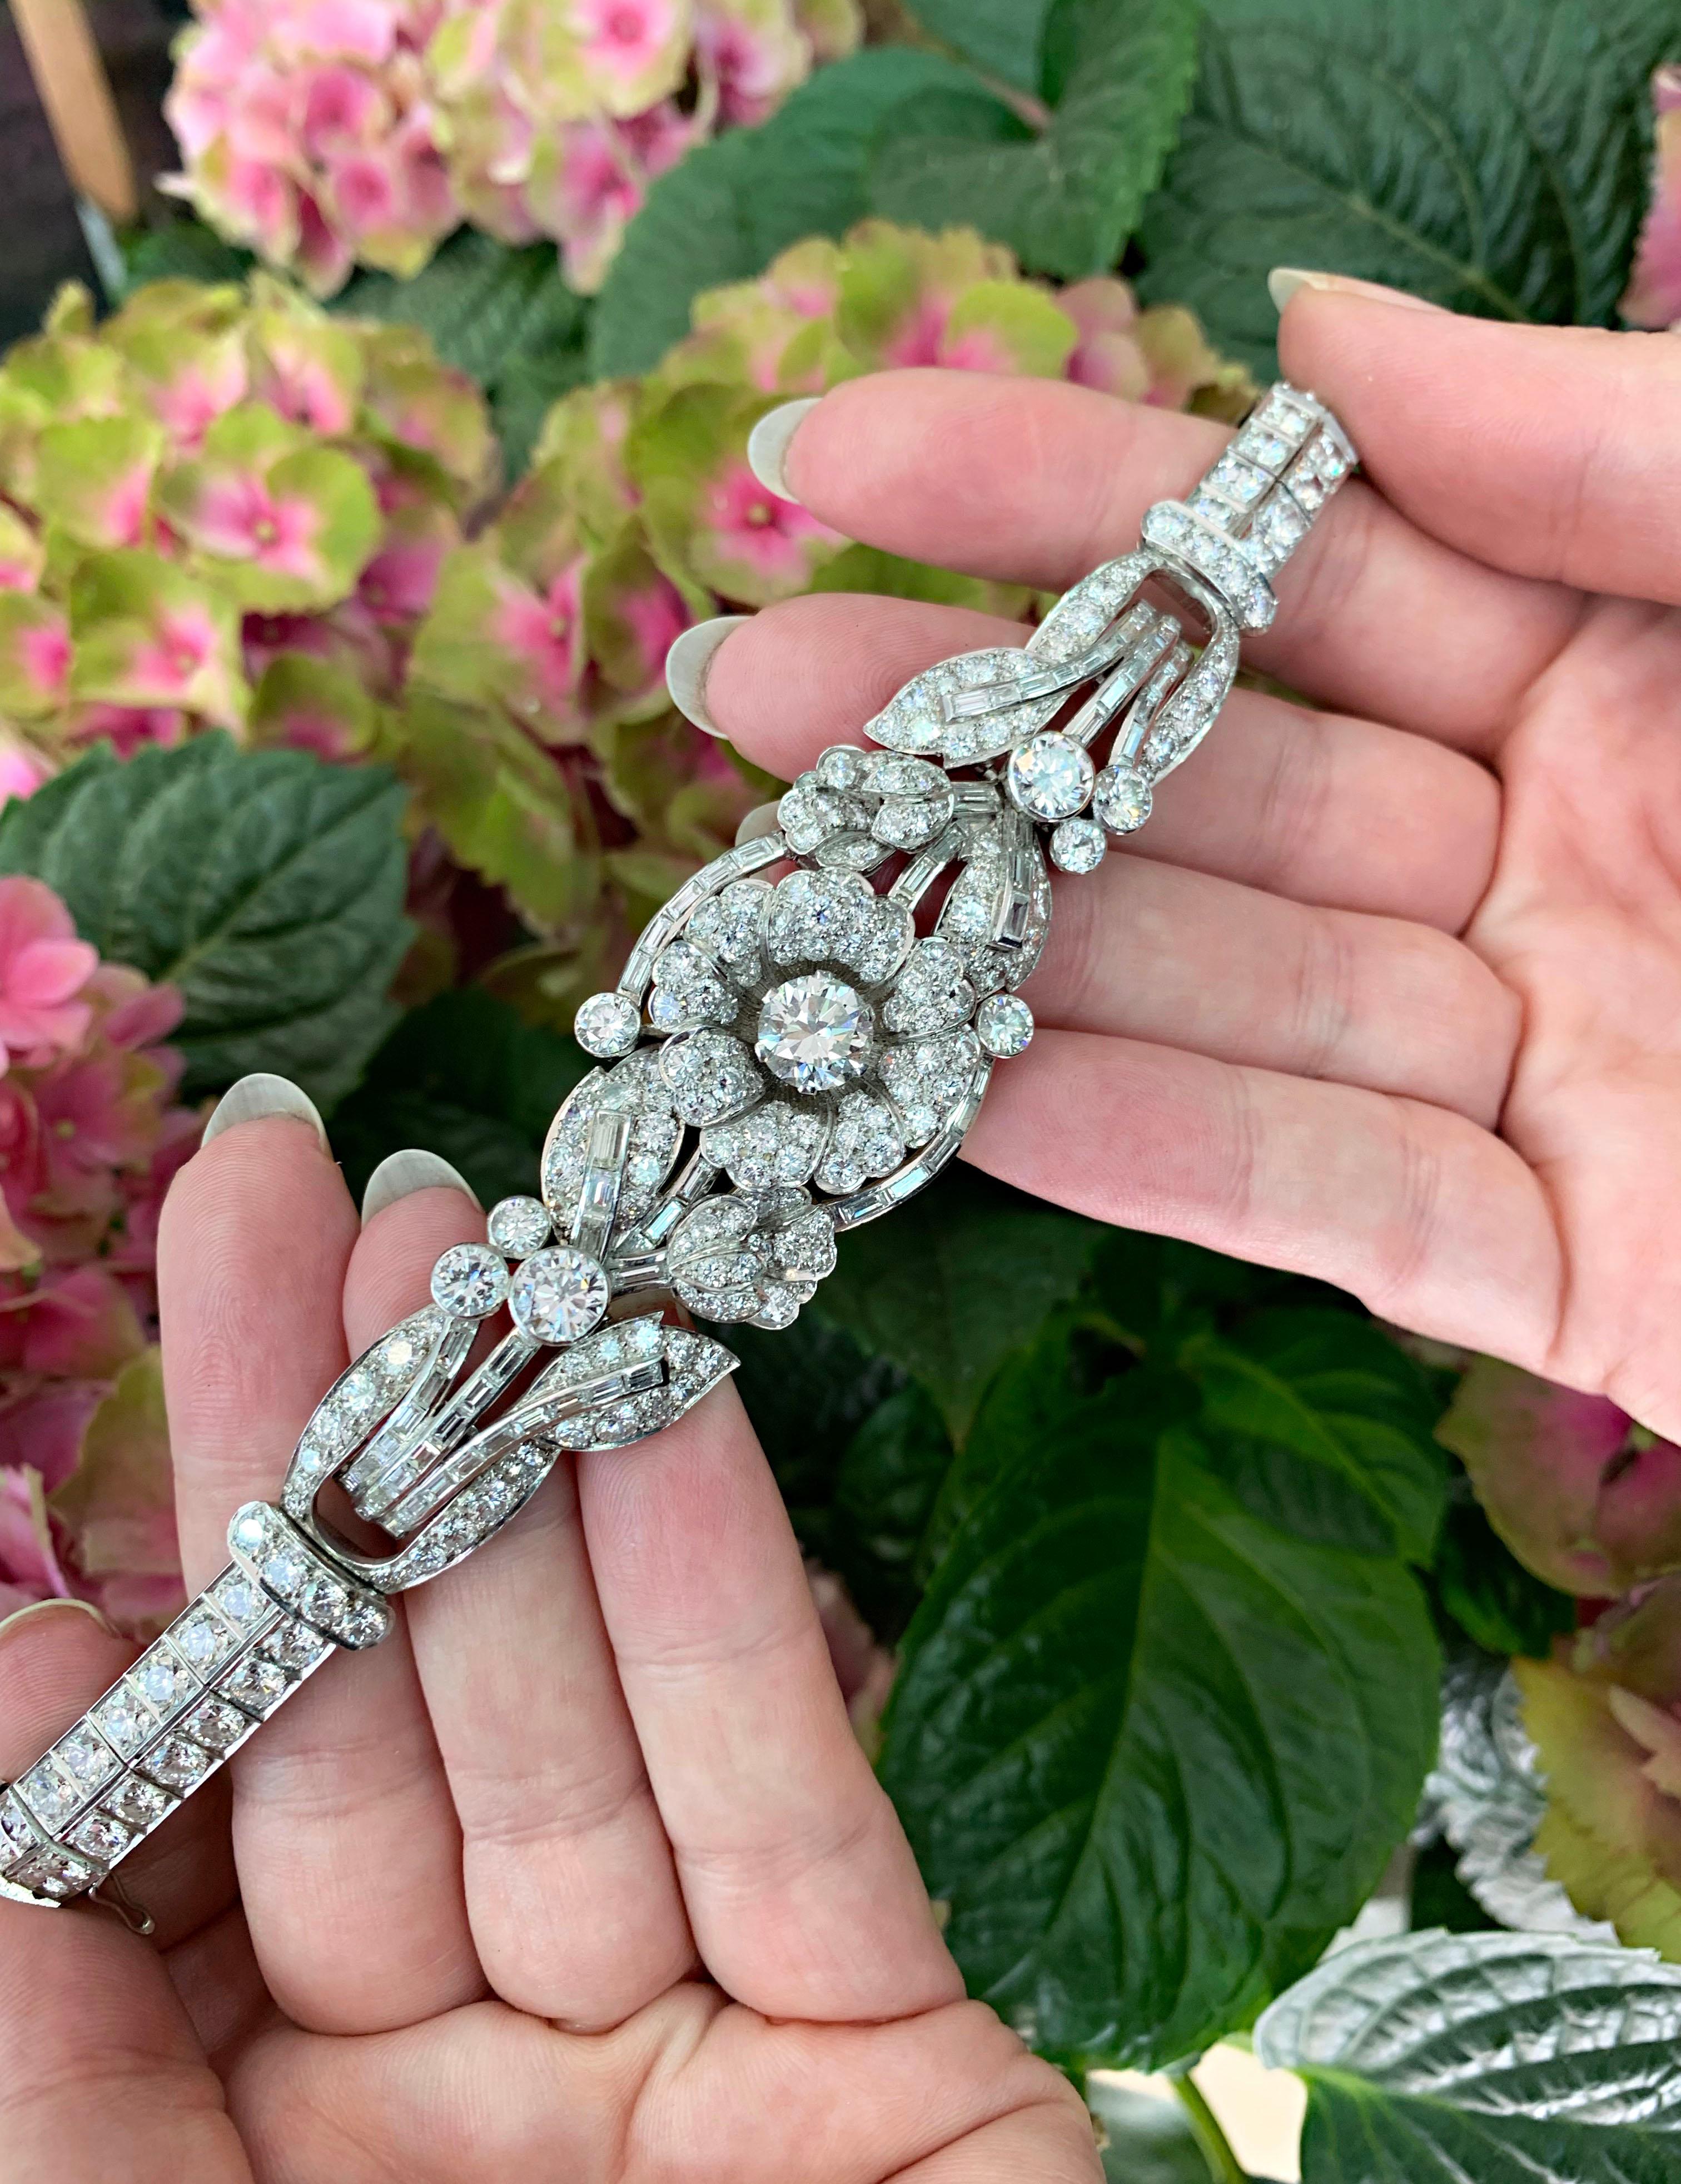 Exceptional all diamond art deco inspired bracelet set with brilliant cut diamonds and baguette cut diamonds with an approximate total weight of 20.00 carats. This exquisite sectional bracelet has an openwork floral design, set with a fine quality